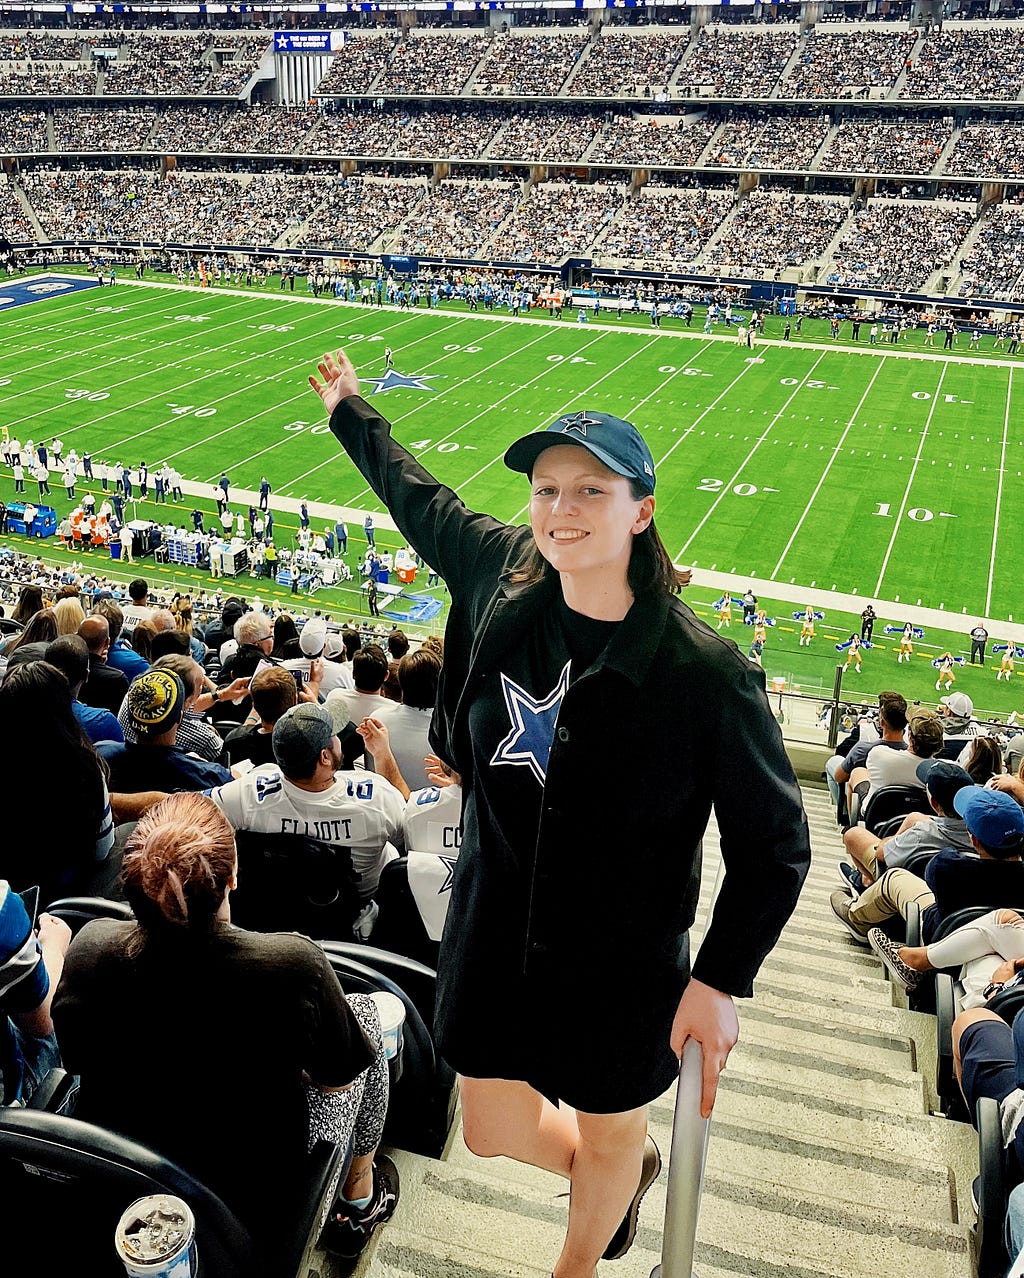 The writer posing from the stands with the AT&T Stadium NFL field behind.